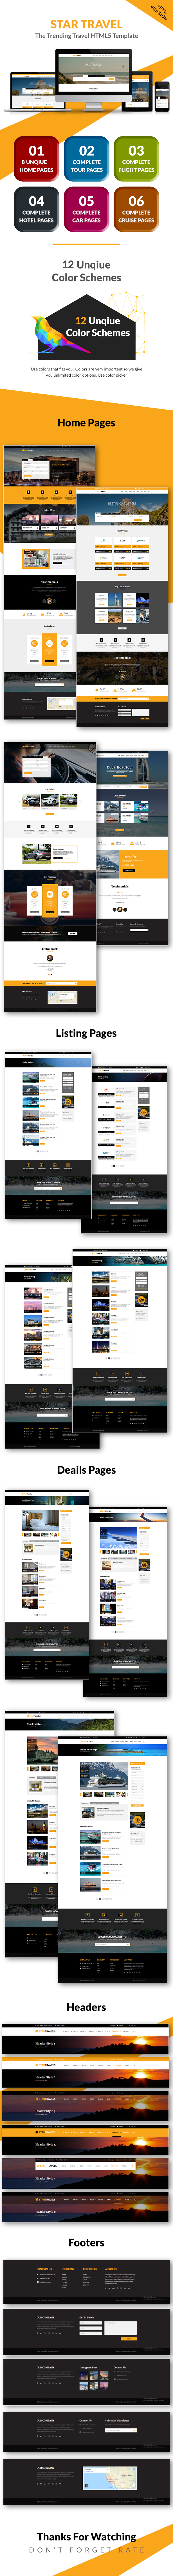 Star Travel - Travel, Tour, Hotel Booking & Admin Dashboard HTML5 Template - 1